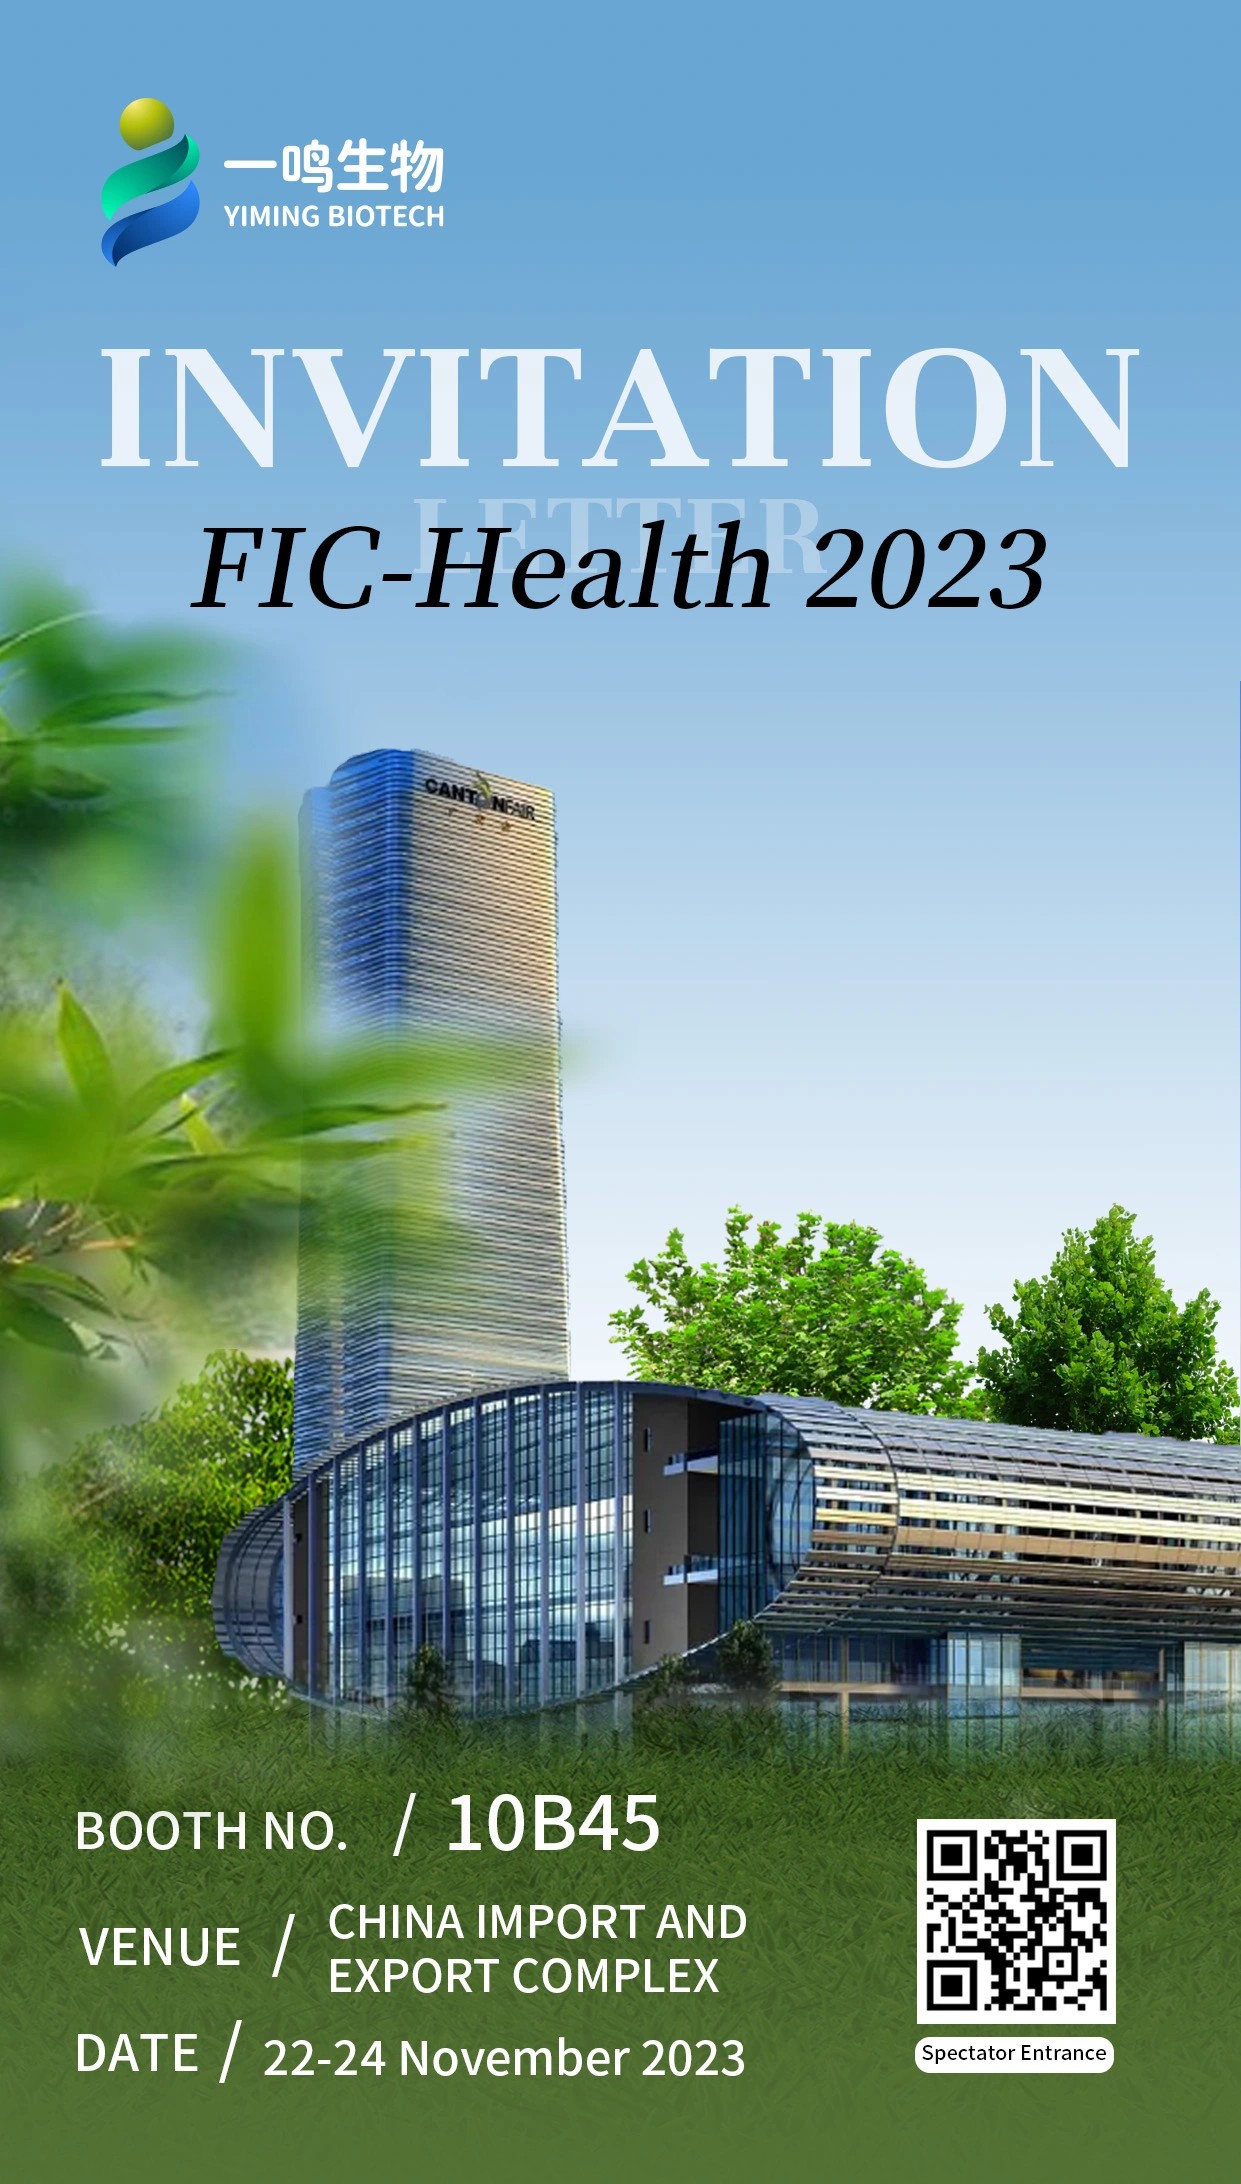 Invitation | Yiming Biotech invites you to FIC- Health Exhibition 2023